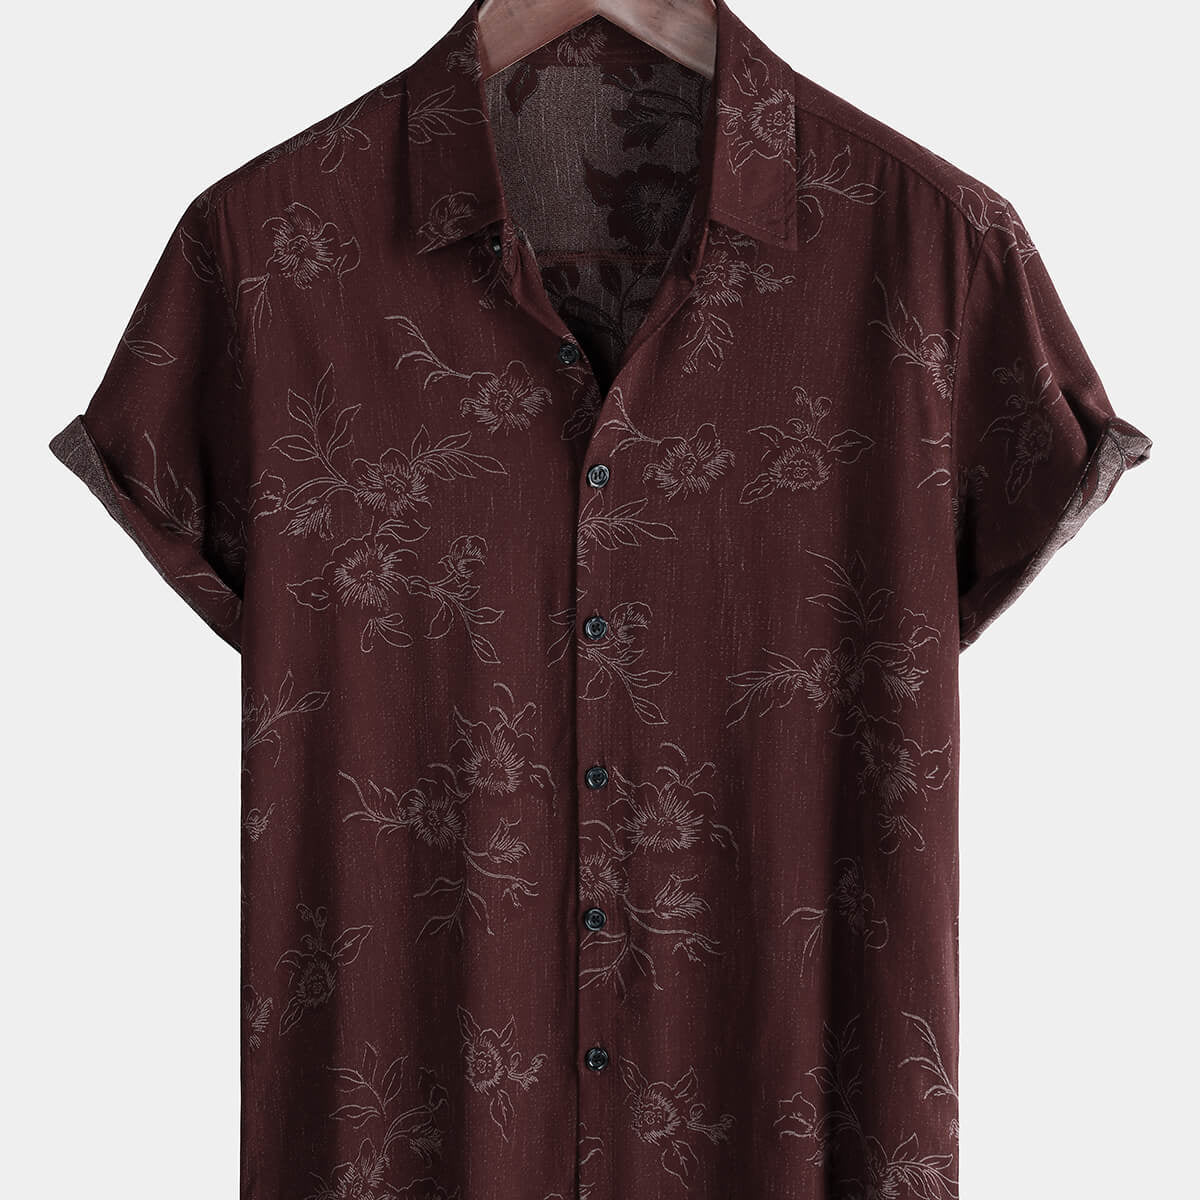 Men's Floral Holiday Red Casual Summer Short Sleeve Button Up Shirt